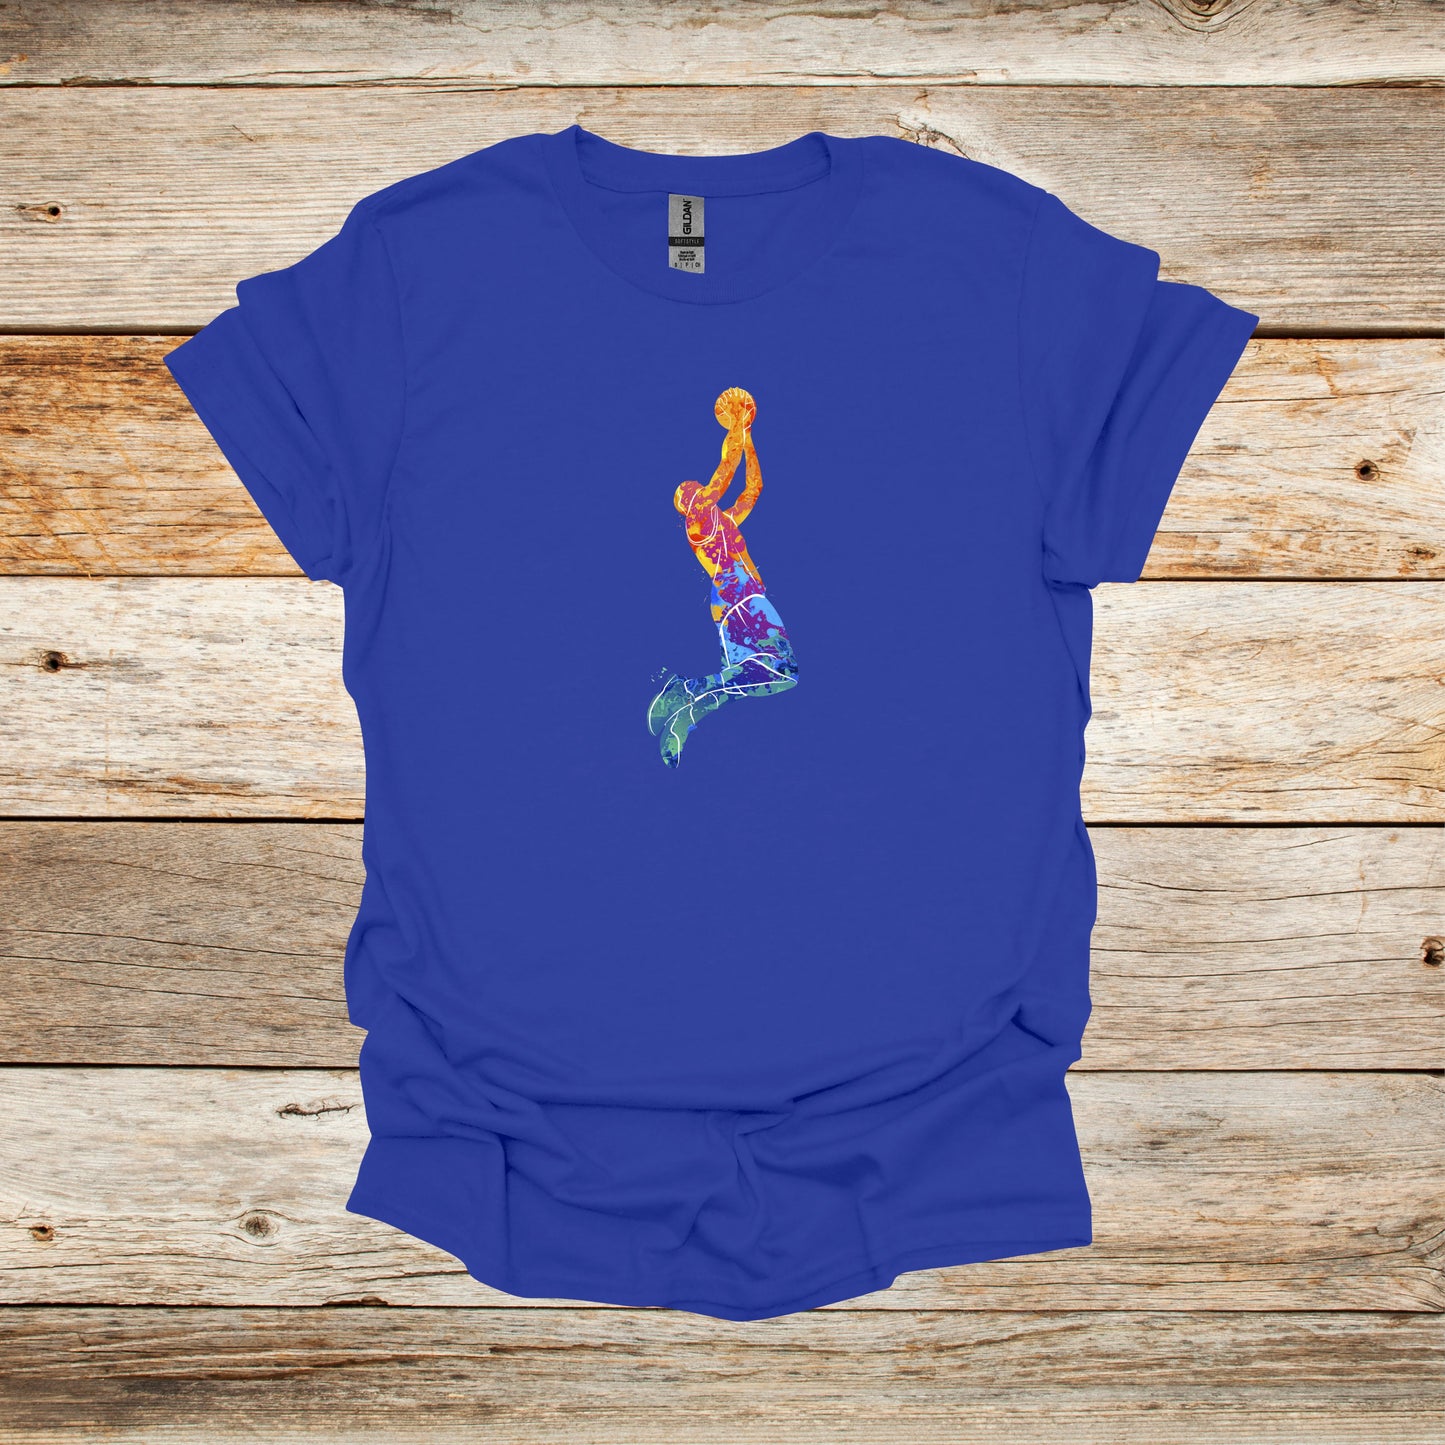 Basketball T-Shirt - Jump Shot - Adult and Children's Tee Shirts - Sports T-Shirts Graphic Avenue Royal Blue Adult Small 